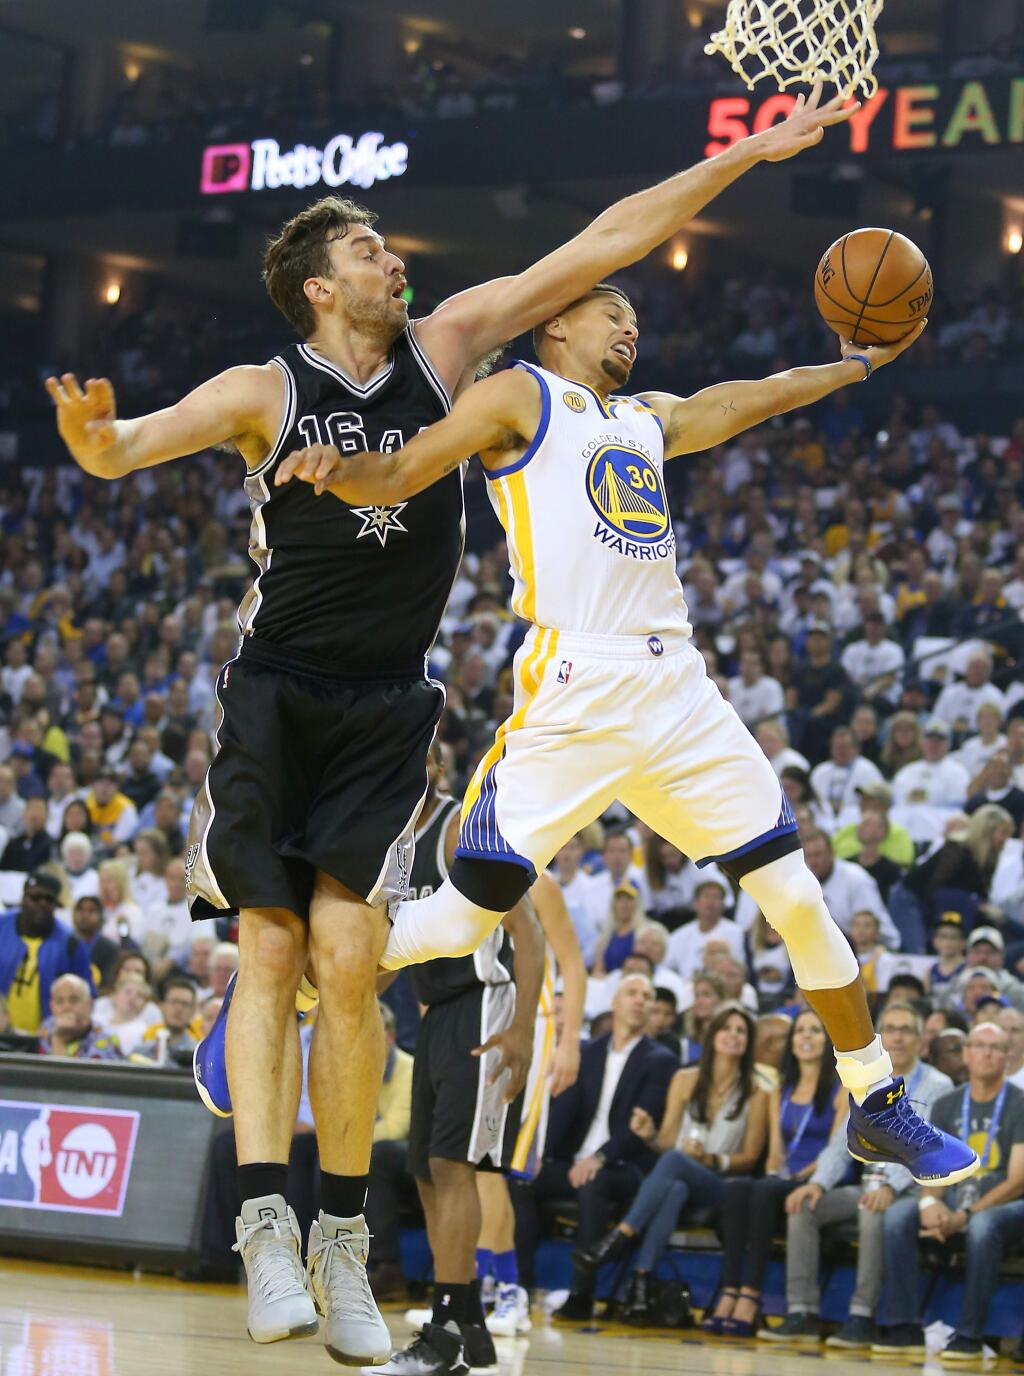 Golden State Warriors guard Stephen Curry is fouled by San Antonio Spurs forward Pau Gasol as he goes to the basket, during their game in Oakland on Tuesday, October 25, 2016. (Christopher Chung/ The Press Democrat)